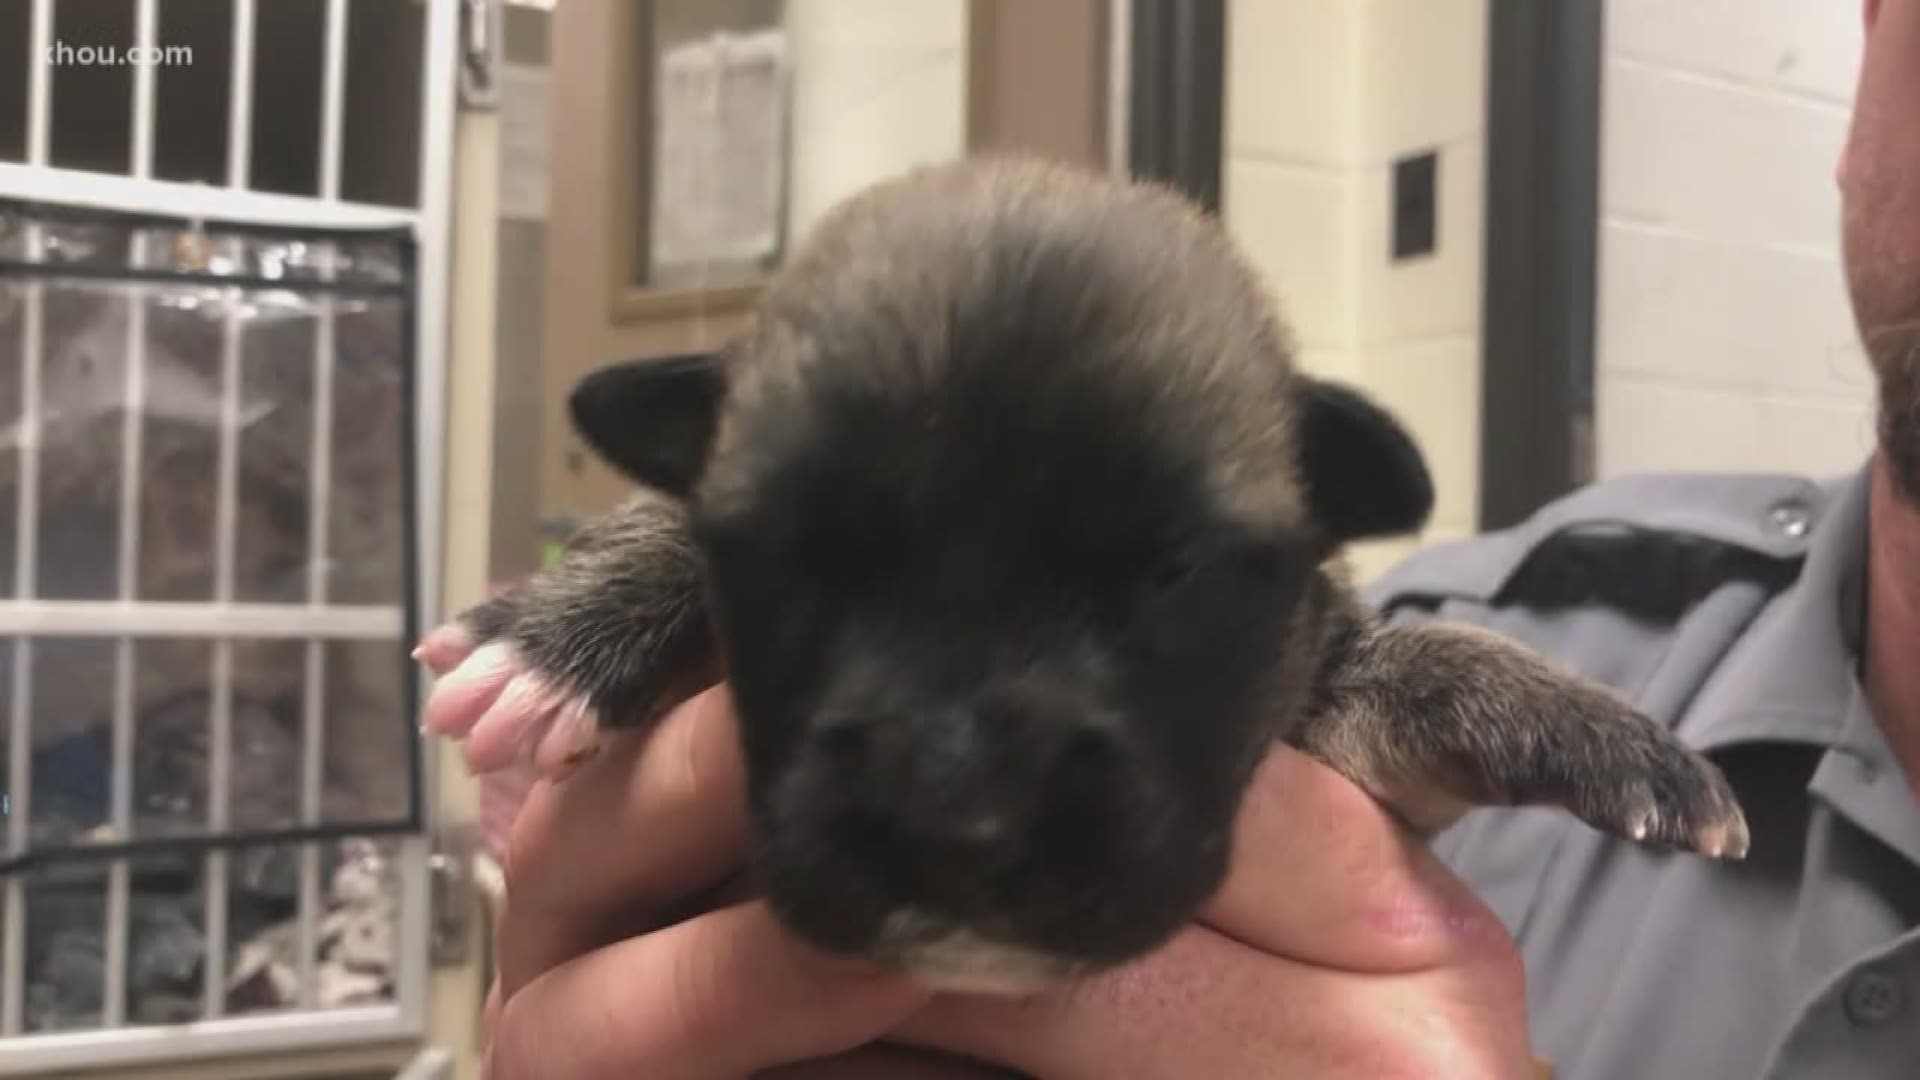 The newborn puppies found dumped near Highway 99 in Cypress Thursday are getting plenty of TLC at the Harris County Animal Shelter. 

Employees are bottle-feeding the seven hungry little puppies that haven't even opened their eyes yet.